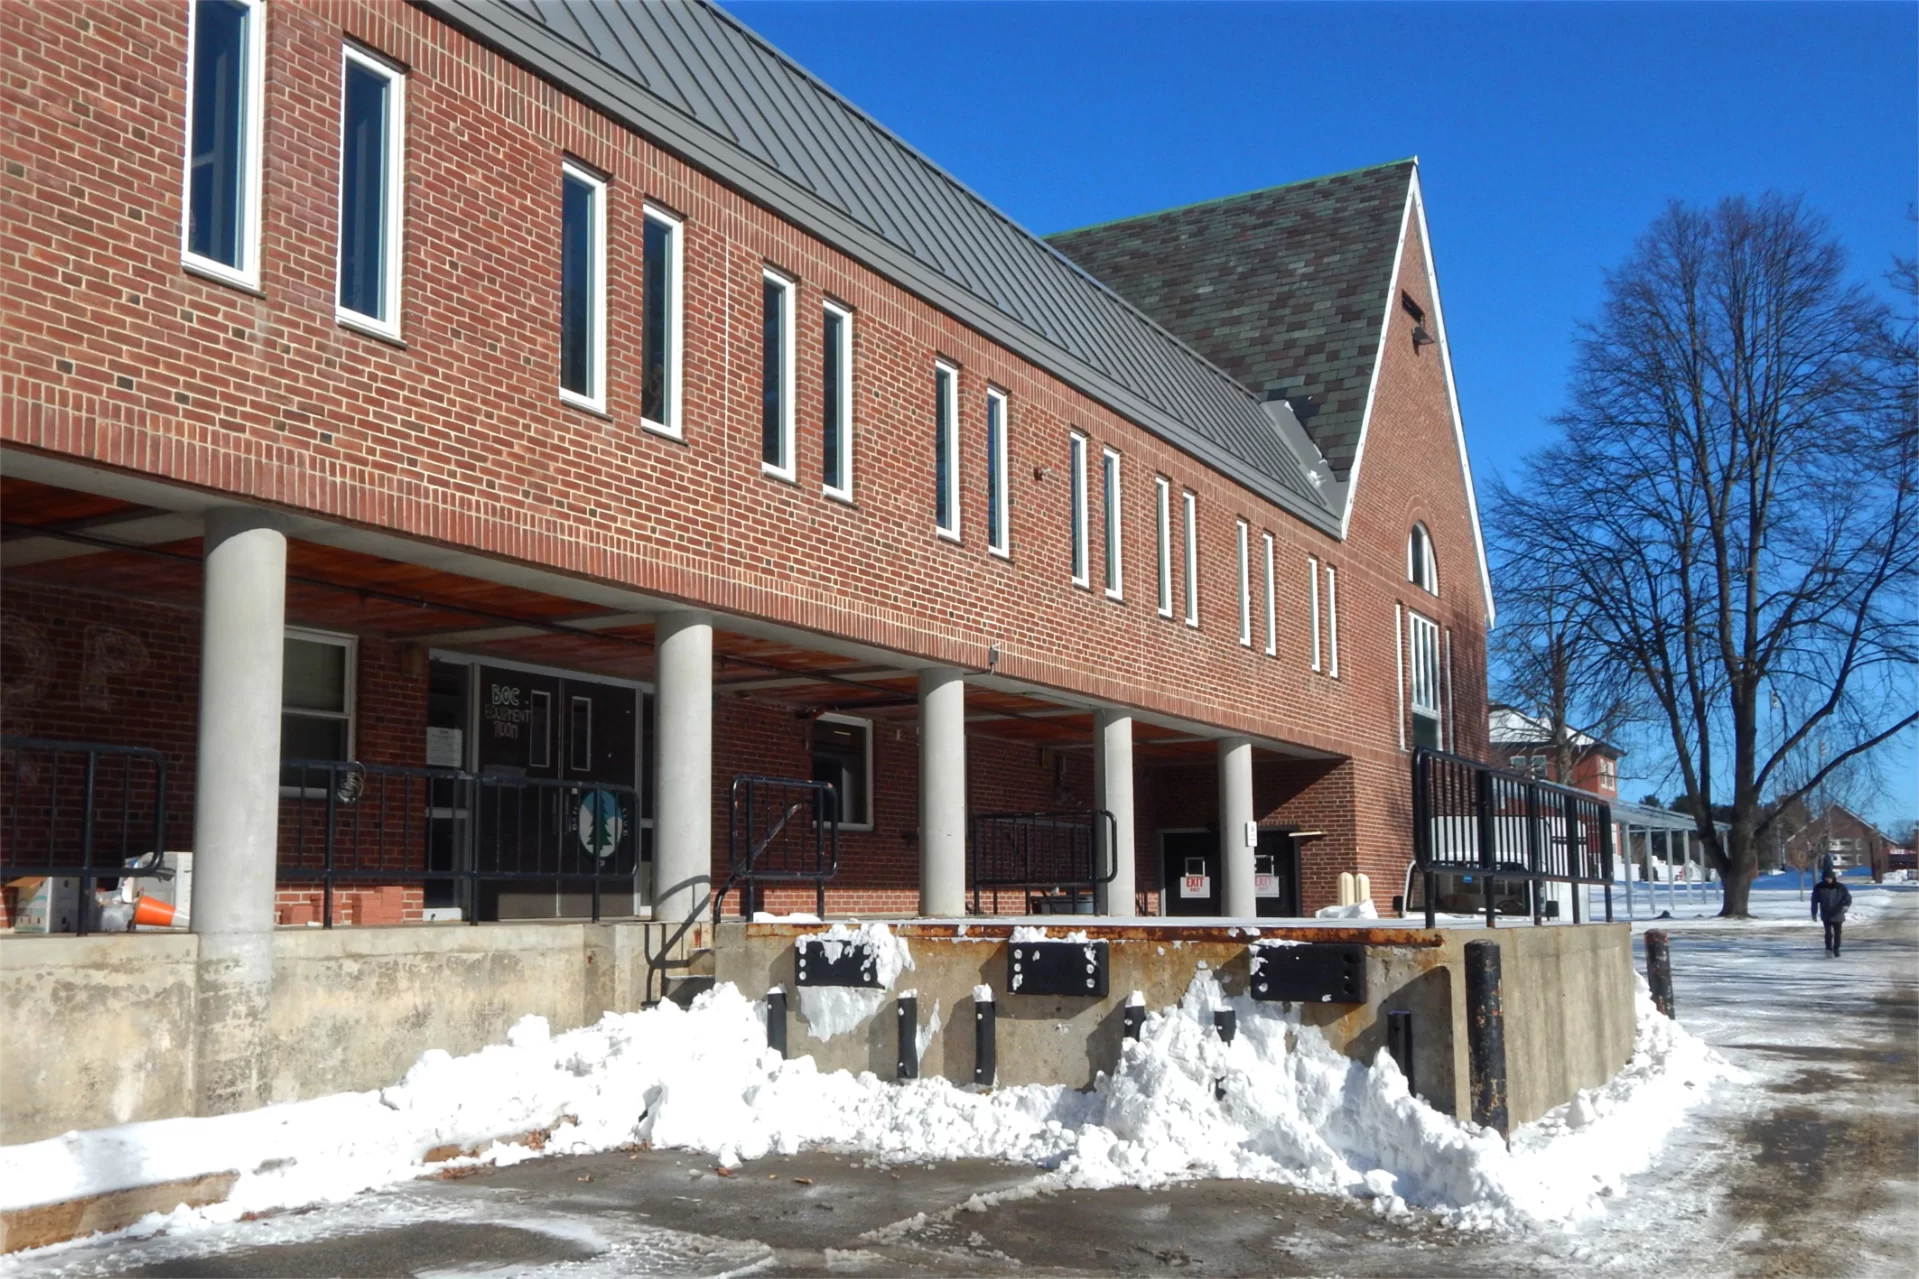 The former Dining Services loading dock and surrounding area will be beautified and converted into an ADA-compliant entrance in the 2022–23 renovation of Chase Hall. (Doug Hubley/Bates College)